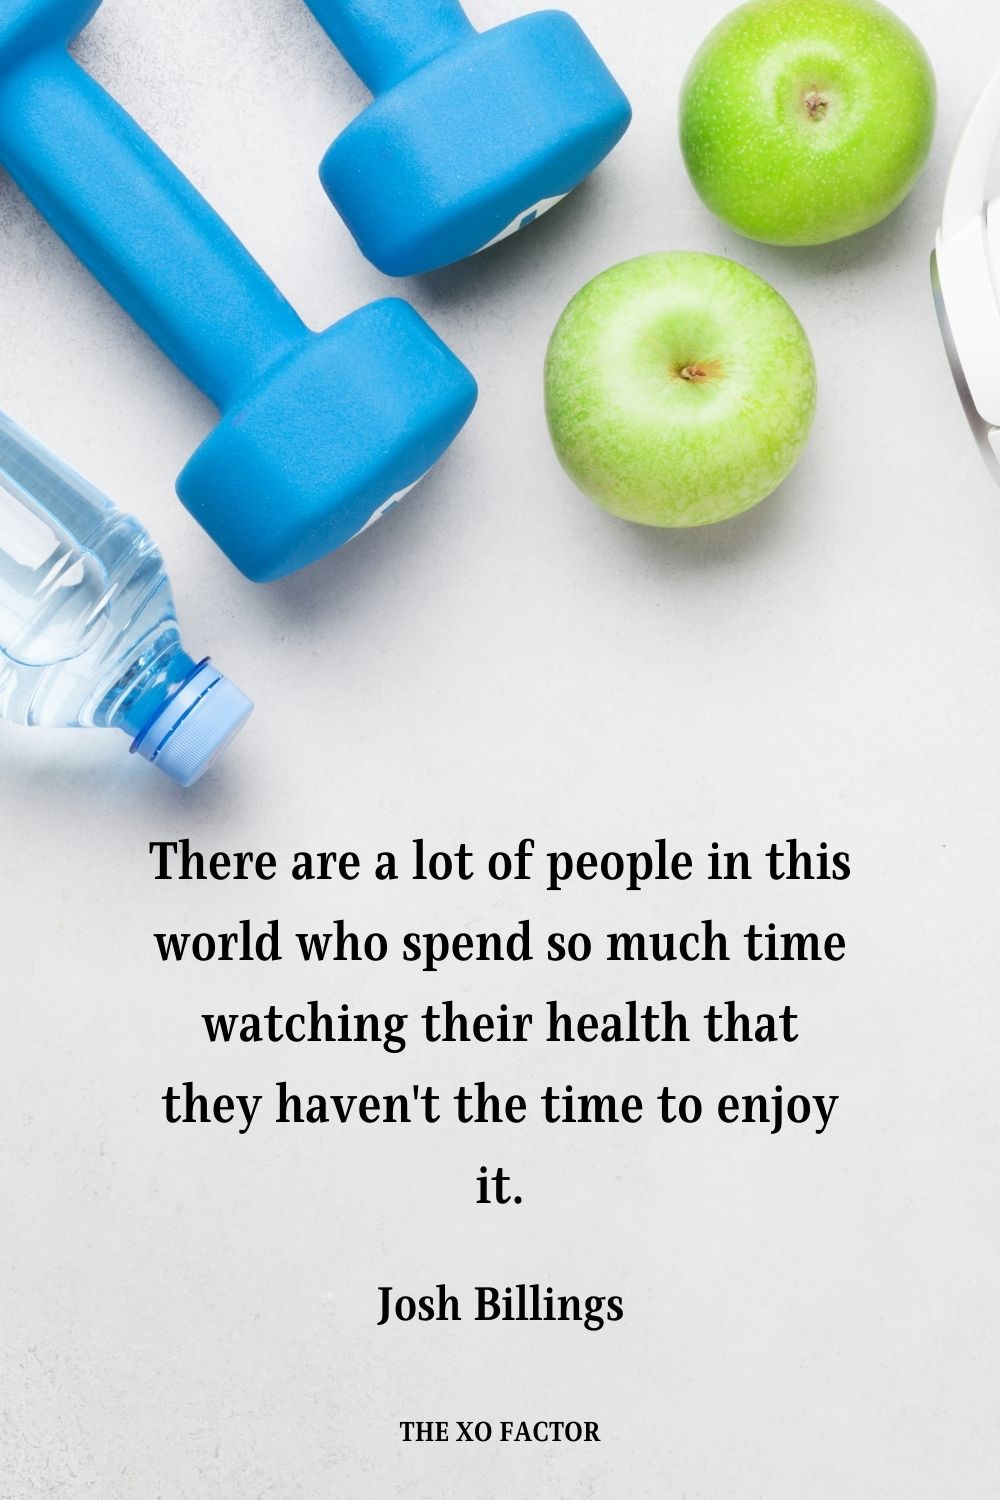 There are a lot of people in this world who spend so much time watching their health that they haven't the time to enjoy it. Josh Billings